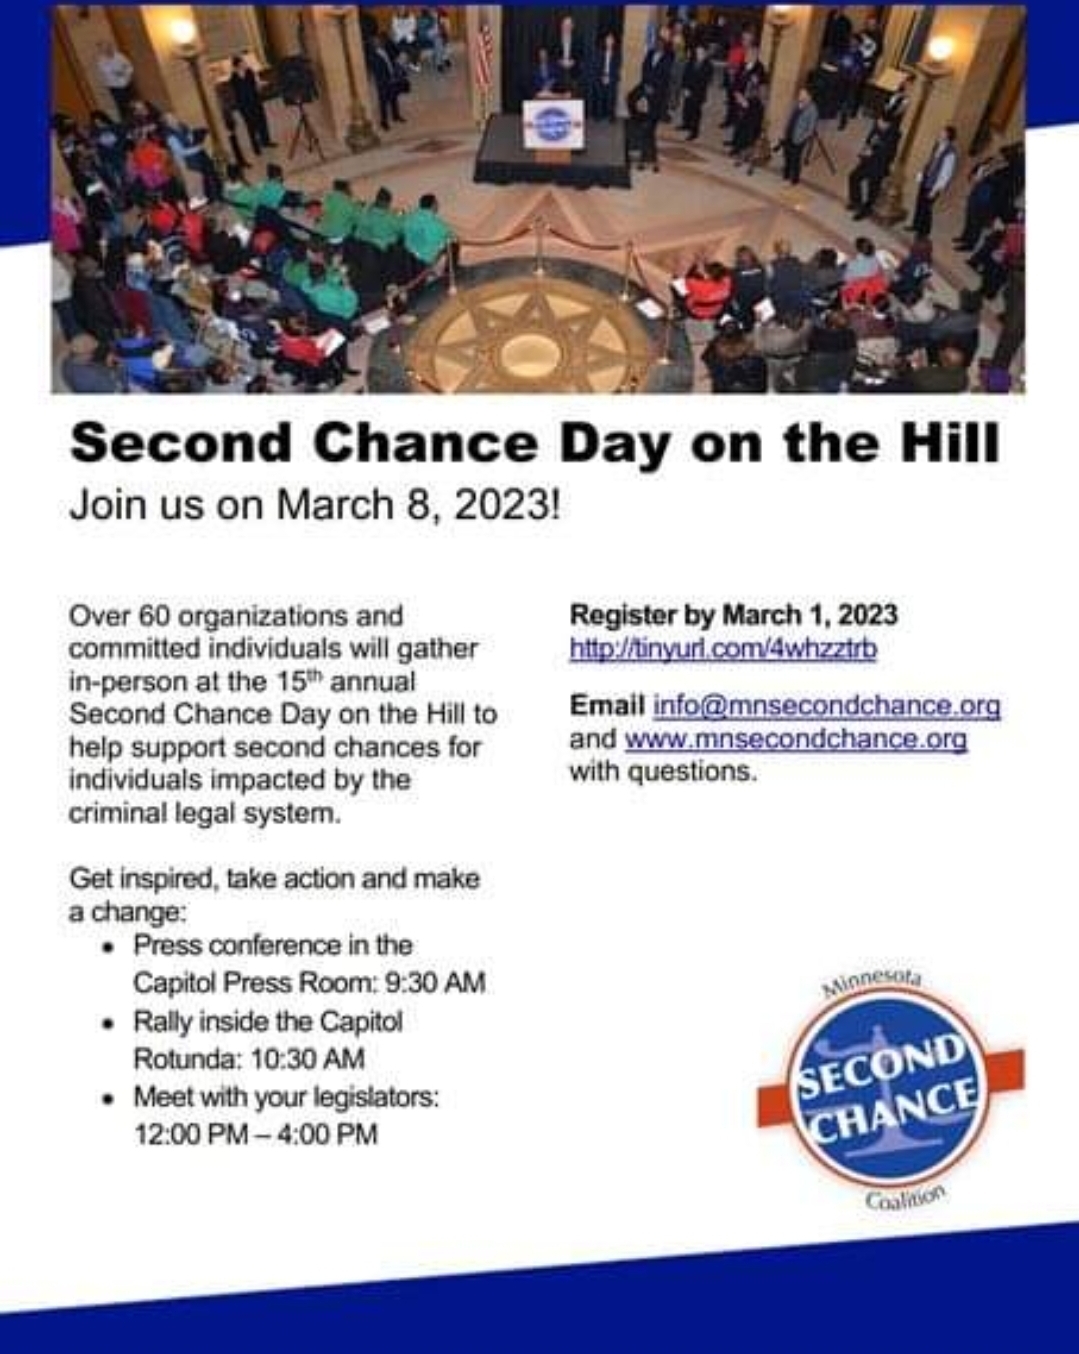 Second Chance Day on the Hill